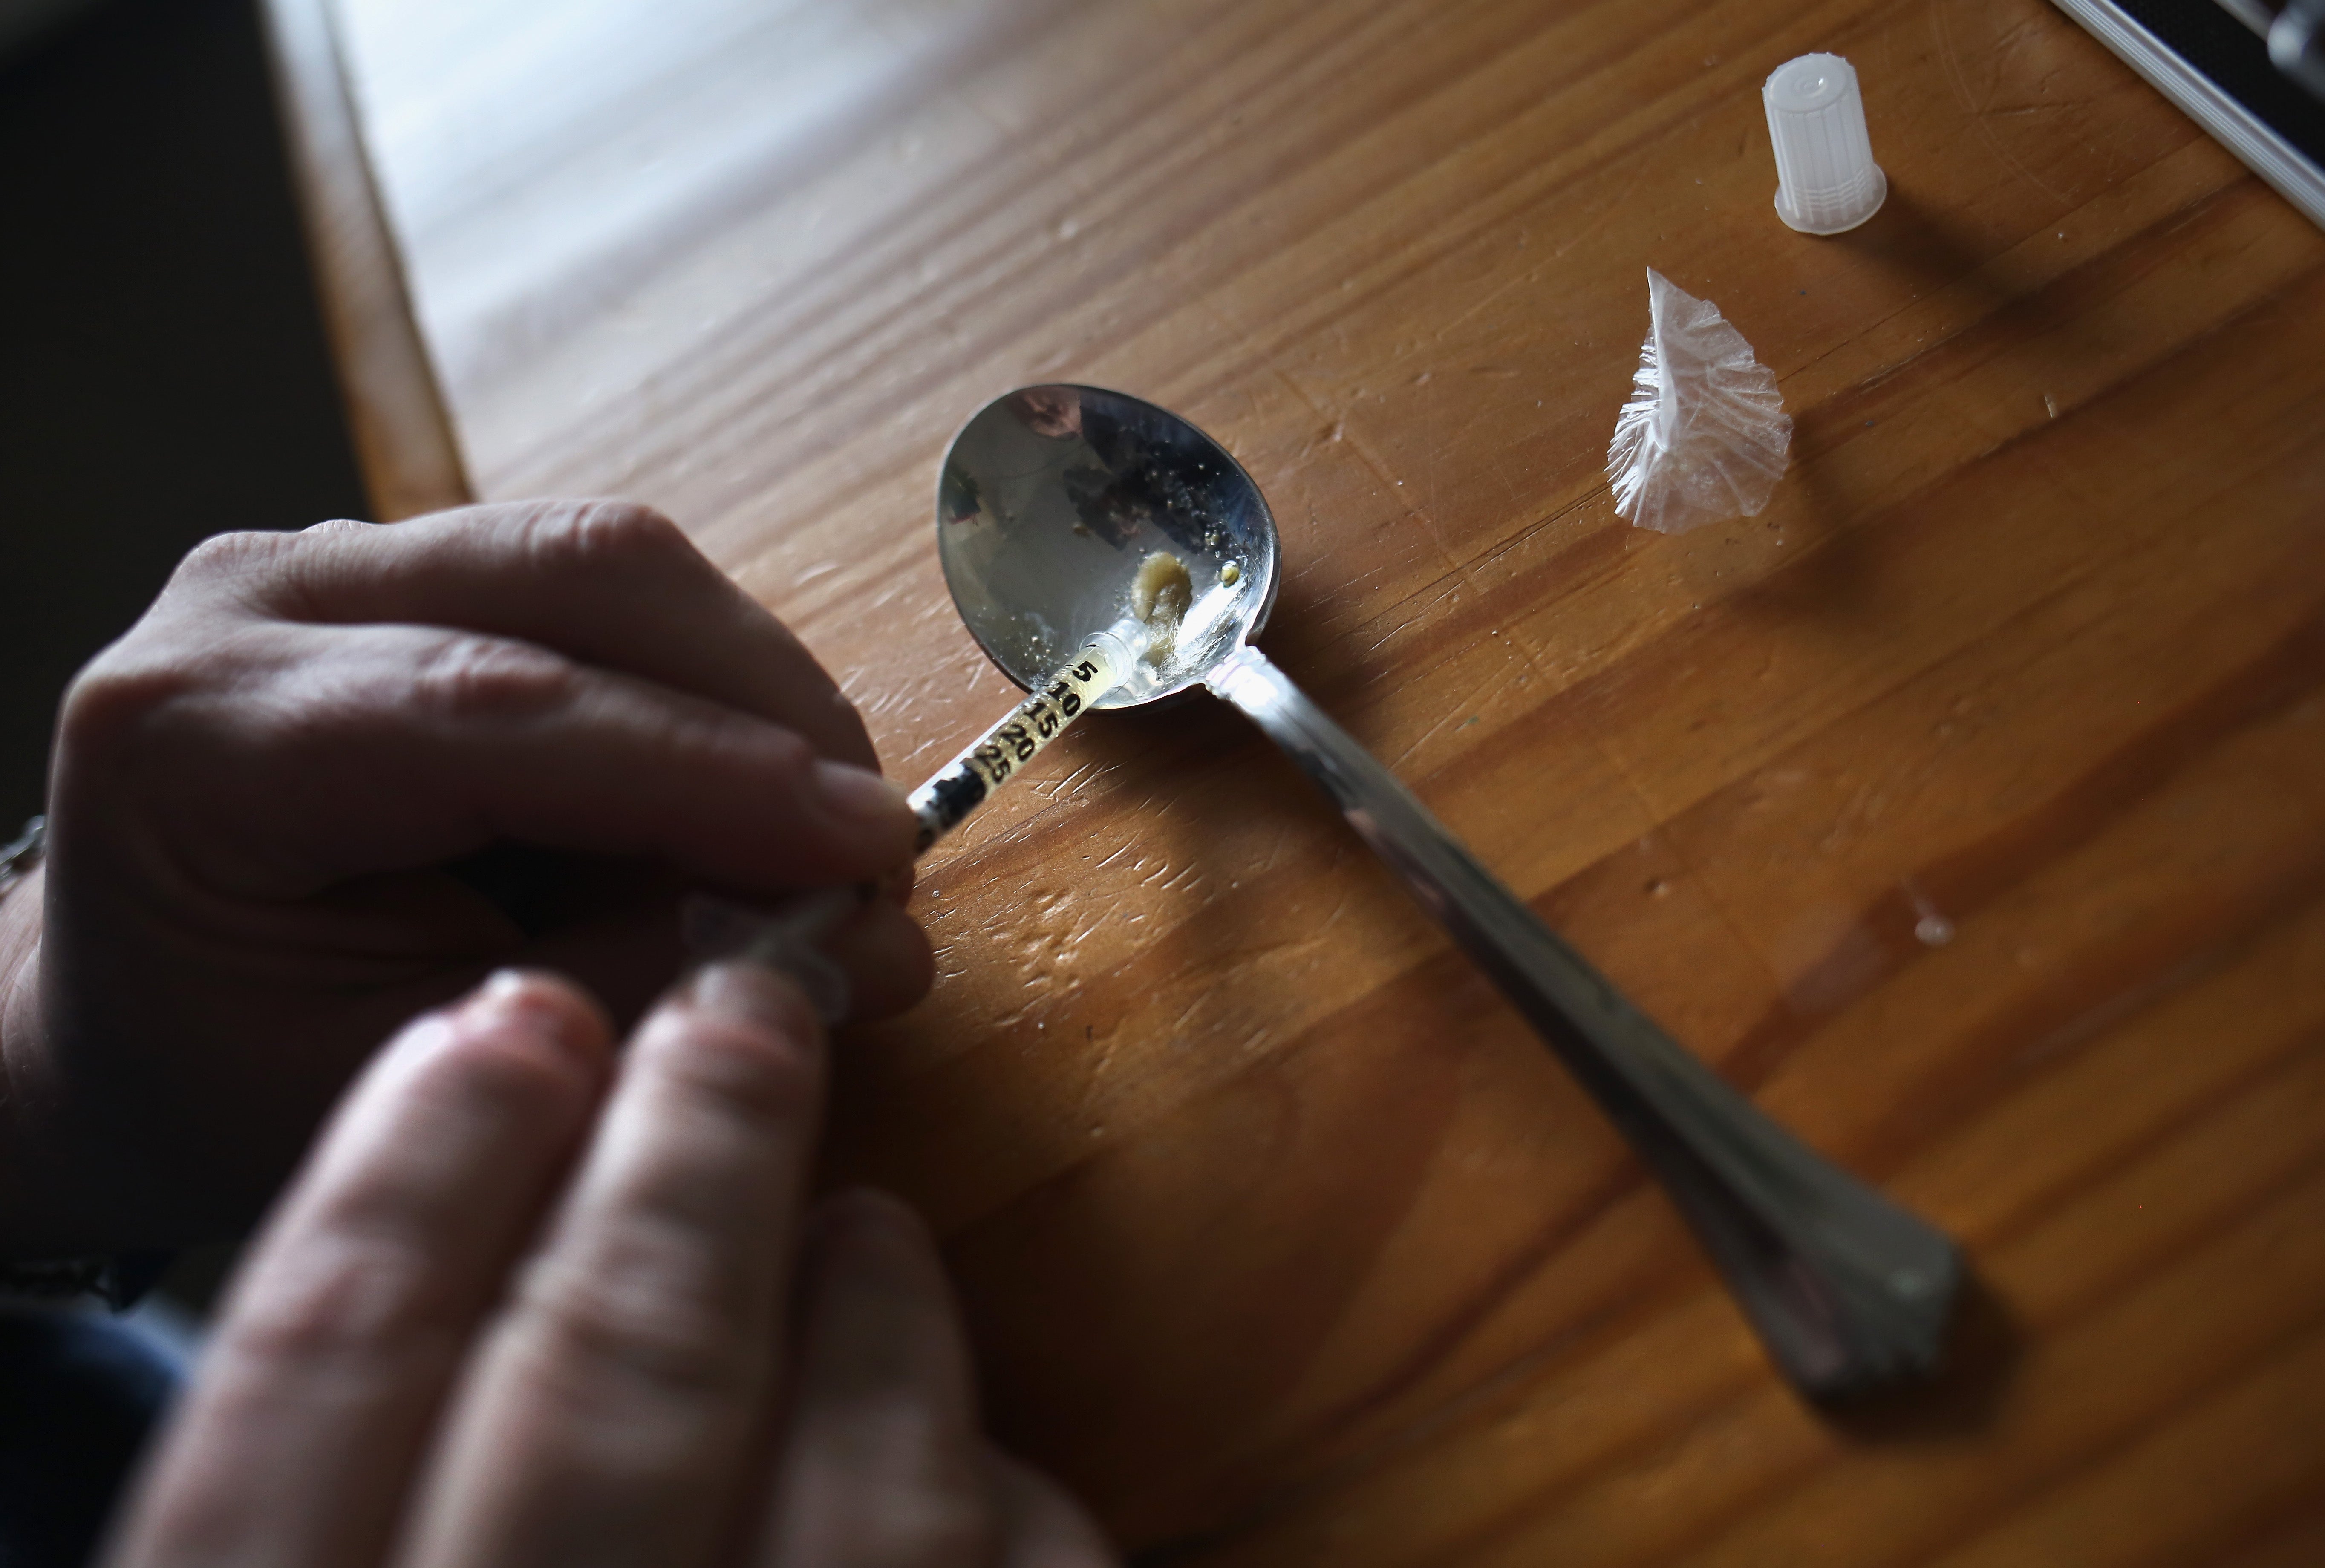 The total cost to society of illegal drug use is estimated by the government to be nearly £20bn a year in England alone